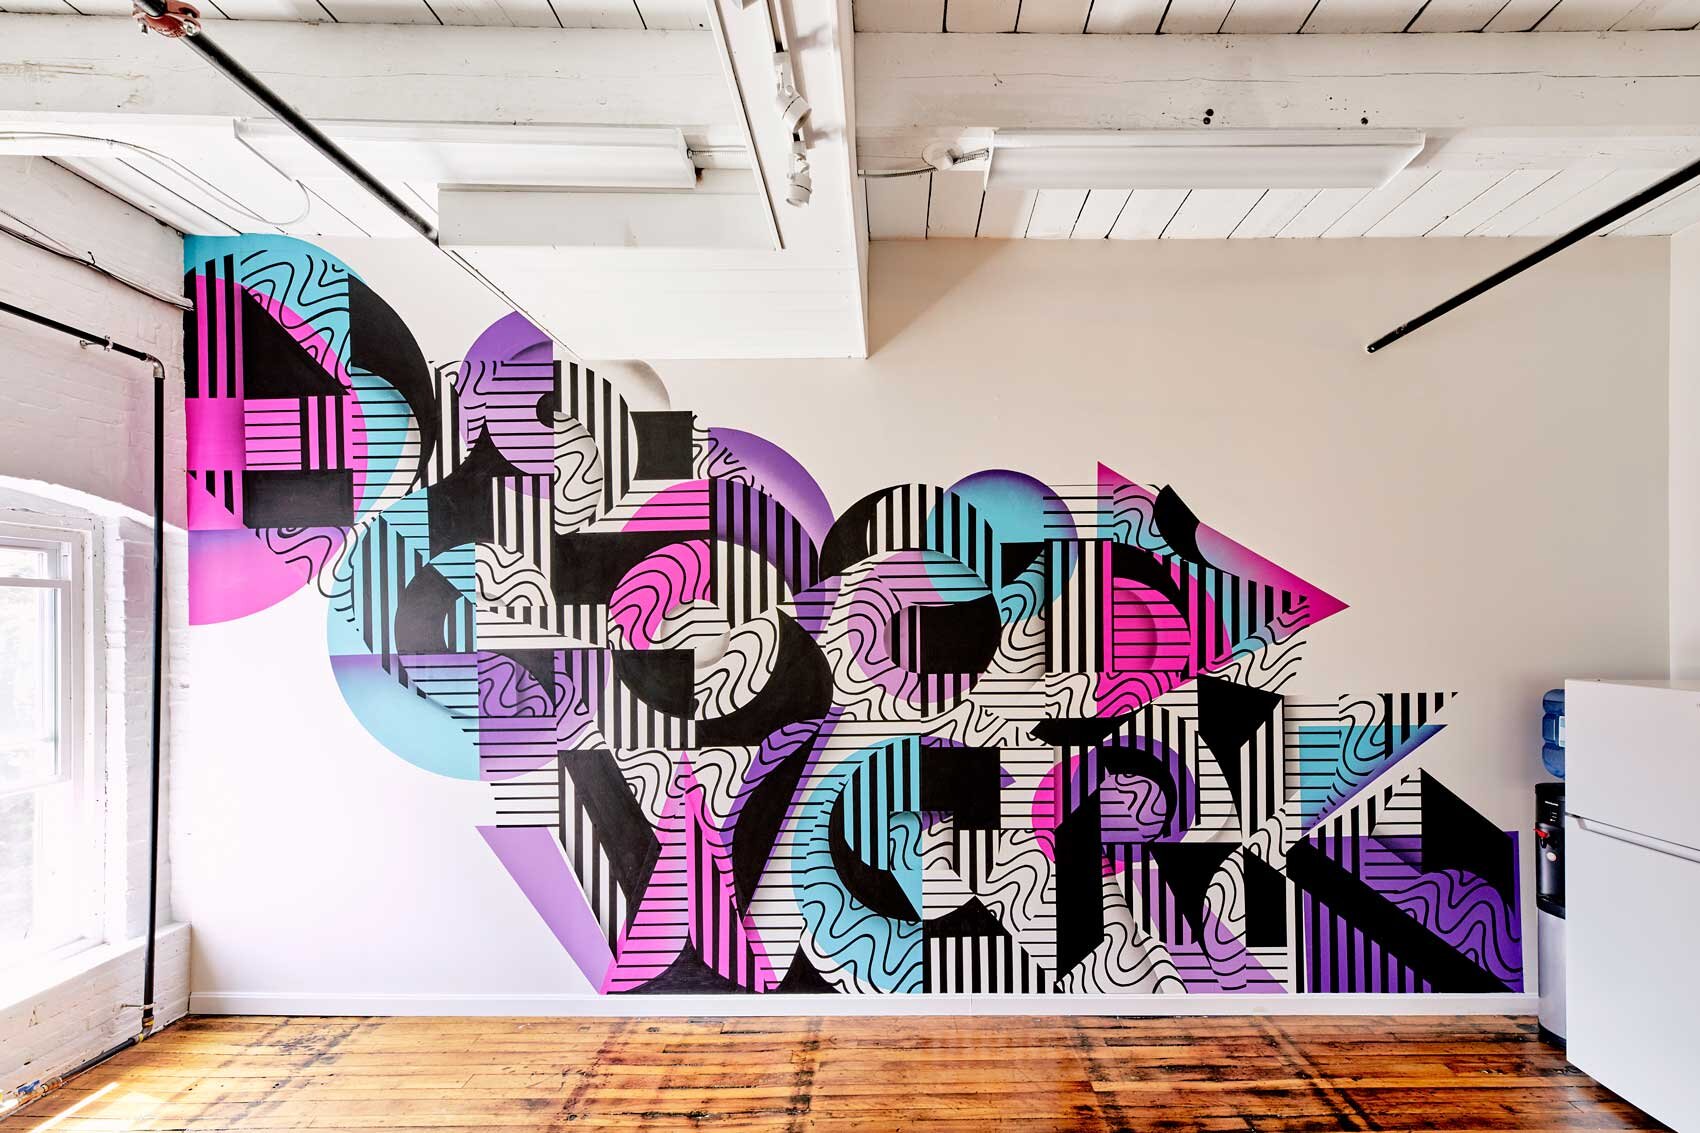 Portland artist Ryan Adams gives his treatment to Dirigo Collective’s guiding principle: Do Good Work. The directive is visible from almost any spot in their new Yarmouth headquarters.